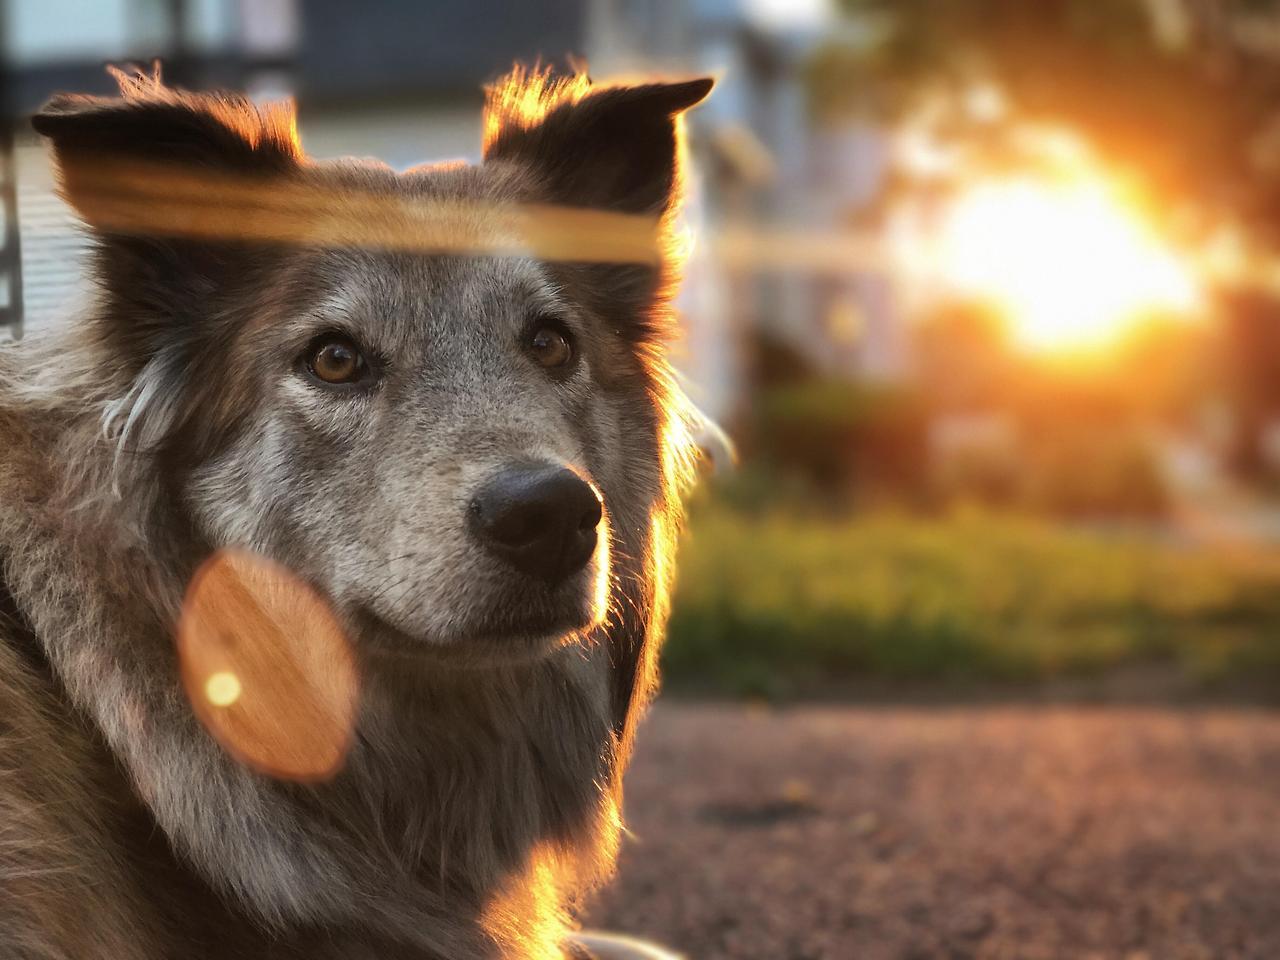 Perfect sunset and my perfect puppy (Source: http://ift.tt/2rZNpQS)